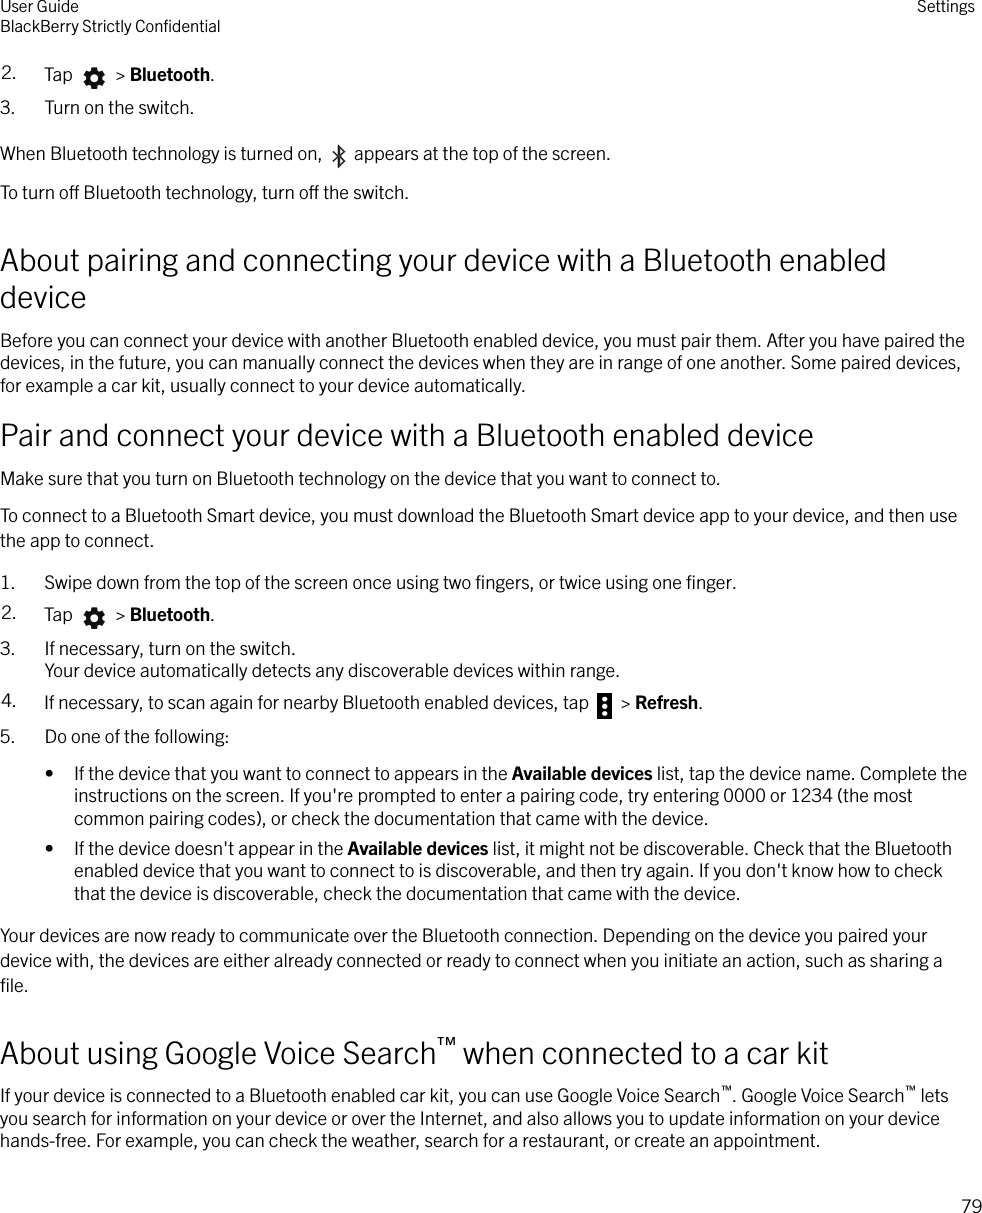 2. Tap   &gt; Bluetooth.3. Turn on the switch.When Bluetooth technology is turned on,   appears at the top of the screen.To turn o Bluetooth technology, turn o the switch.About pairing and connecting your device with a Bluetooth enableddeviceBefore you can connect your device with another Bluetooth enabled device, you must pair them. After you have paired thedevices, in the future, you can manually connect the devices when they are in range of one another. Some paired devices,for example a car kit, usually connect to your device automatically.Pair and connect your device with a Bluetooth enabled deviceMake sure that you turn on Bluetooth technology on the device that you want to connect to.To connect to a Bluetooth Smart device, you must download the Bluetooth Smart device app to your device, and then usethe app to connect.1. Swipe down from the top of the screen once using two ﬁngers, or twice using one ﬁnger.2. Tap   &gt; Bluetooth.3. If necessary, turn on the switch.Your device automatically detects any discoverable devices within range.4. If necessary, to scan again for nearby Bluetooth enabled devices, tap   &gt; Refresh.5. Do one of the following:• If the device that you want to connect to appears in the Available devices list, tap the device name. Complete theinstructions on the screen. If you&apos;re prompted to enter a pairing code, try entering 0000 or 1234 (the mostcommon pairing codes), or check the documentation that came with the device.• If the device doesn&apos;t appear in the Available devices list, it might not be discoverable. Check that the Bluetoothenabled device that you want to connect to is discoverable, and then try again. If you don&apos;t know how to checkthat the device is discoverable, check the documentation that came with the device.Your devices are now ready to communicate over the Bluetooth connection. Depending on the device you paired yourdevice with, the devices are either already connected or ready to connect when you initiate an action, such as sharing aﬁle.About using Google Voice Search™ when connected to a car kitIf your device is connected to a Bluetooth enabled car kit, you can use Google Voice Search™. Google Voice Search™ letsyou search for information on your device or over the Internet, and also allows you to update information on your devicehands-free. For example, you can check the weather, search for a restaurant, or create an appointment.User GuideBlackBerry Strictly ConﬁdentialSettings79